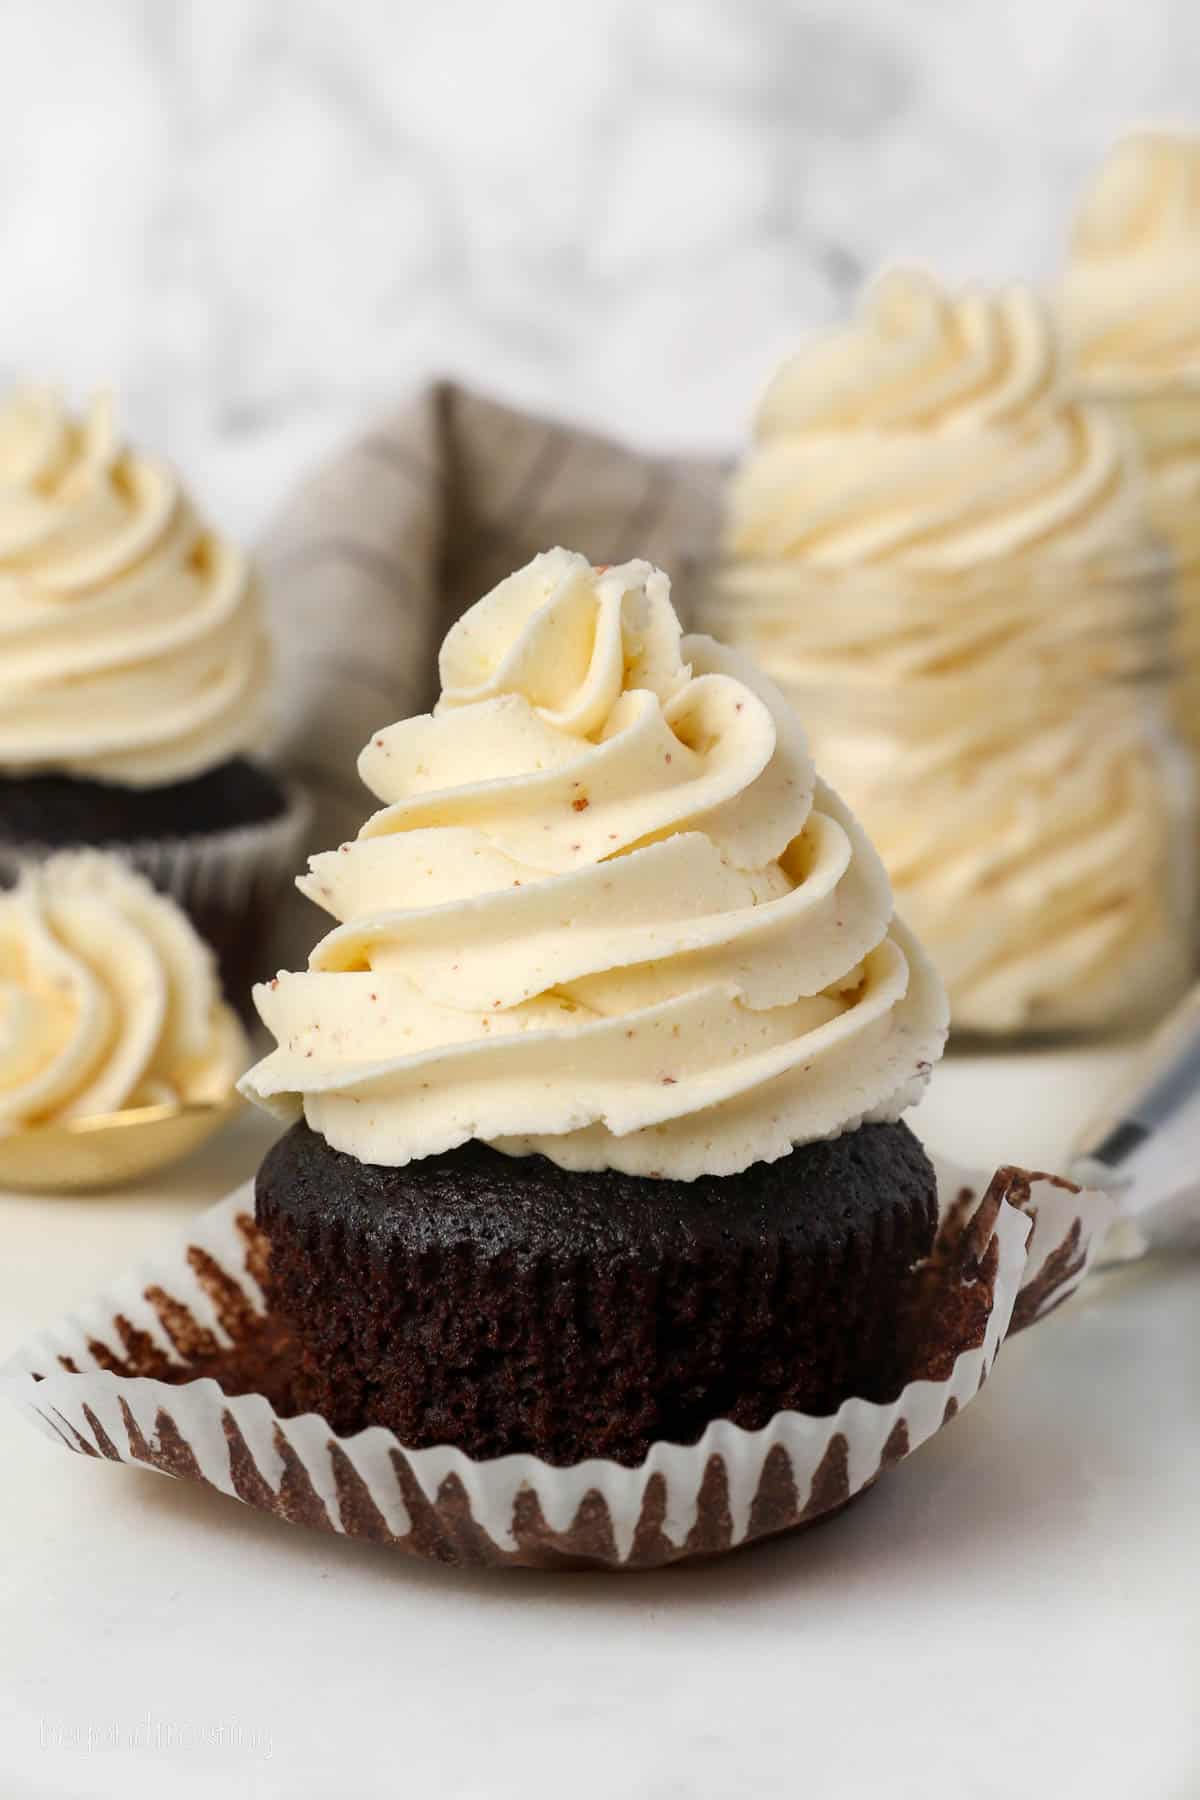 A partially unwrapped chocolate cupcake frosted with a swirl of brown butter frosting.